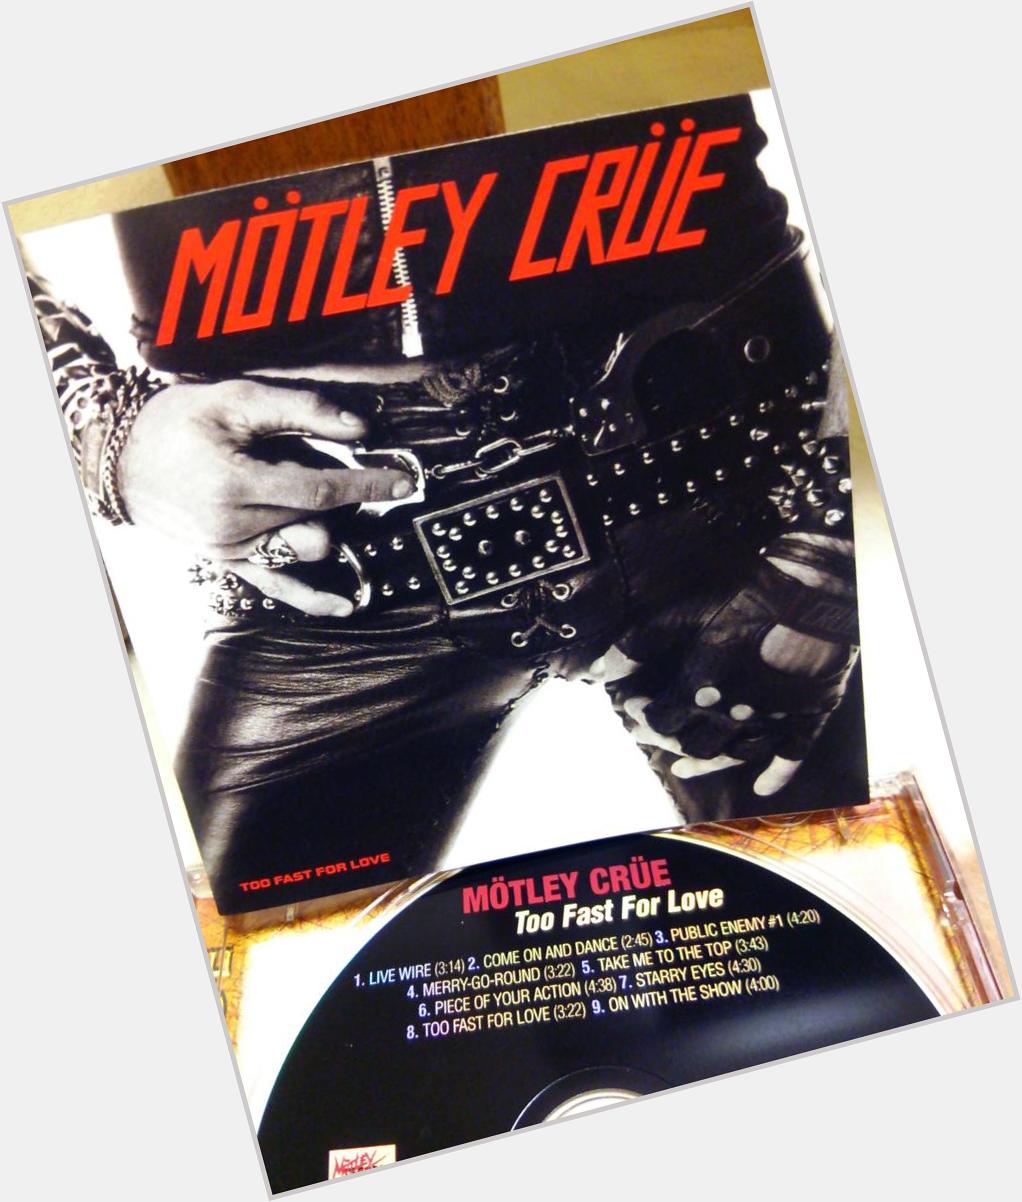 Happy Birthday!! Vince Neil MOTLEY CRUE Too Fast For Love 1080P Carnival of Sins Blu-Ray/DVD:  